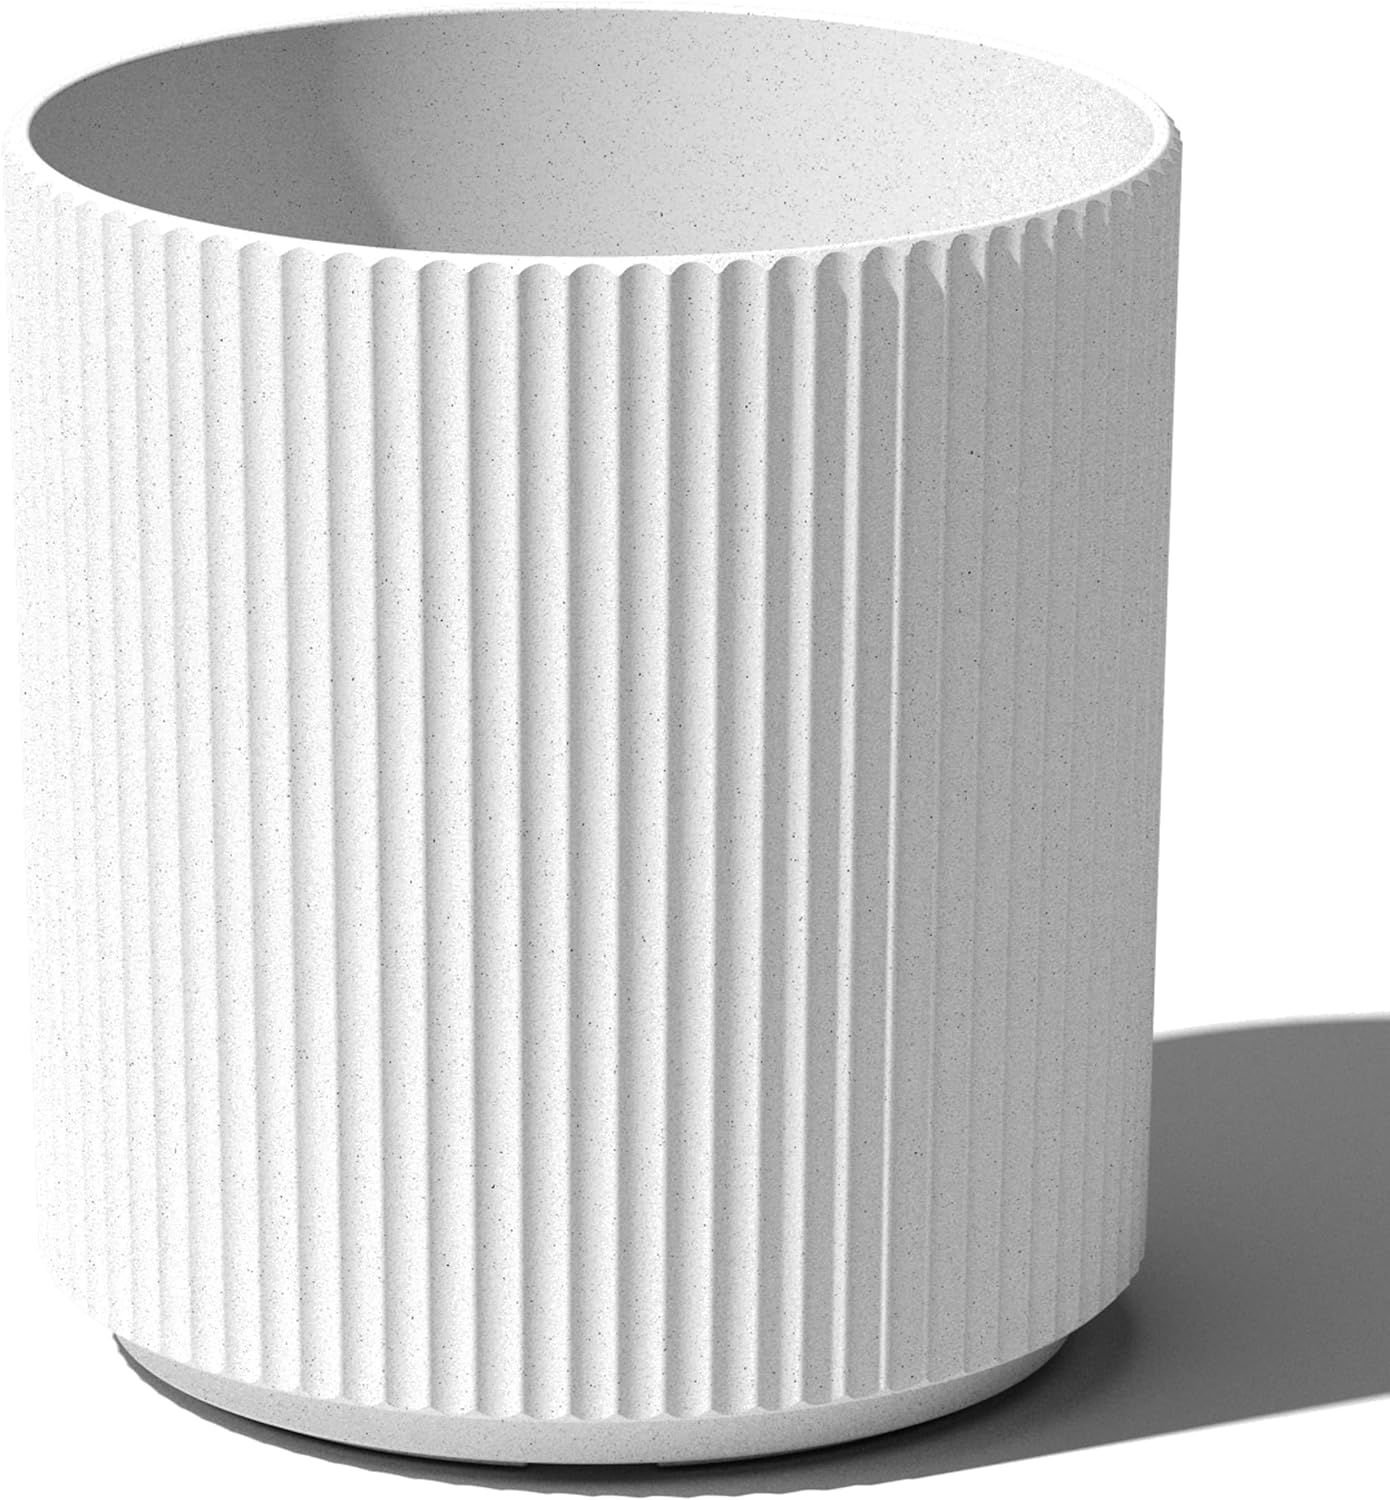 Veradek Demi Planter, White, 15 in Wide x 16 in High, All Weather Resistant, Made from Patent Con... | Amazon (US)